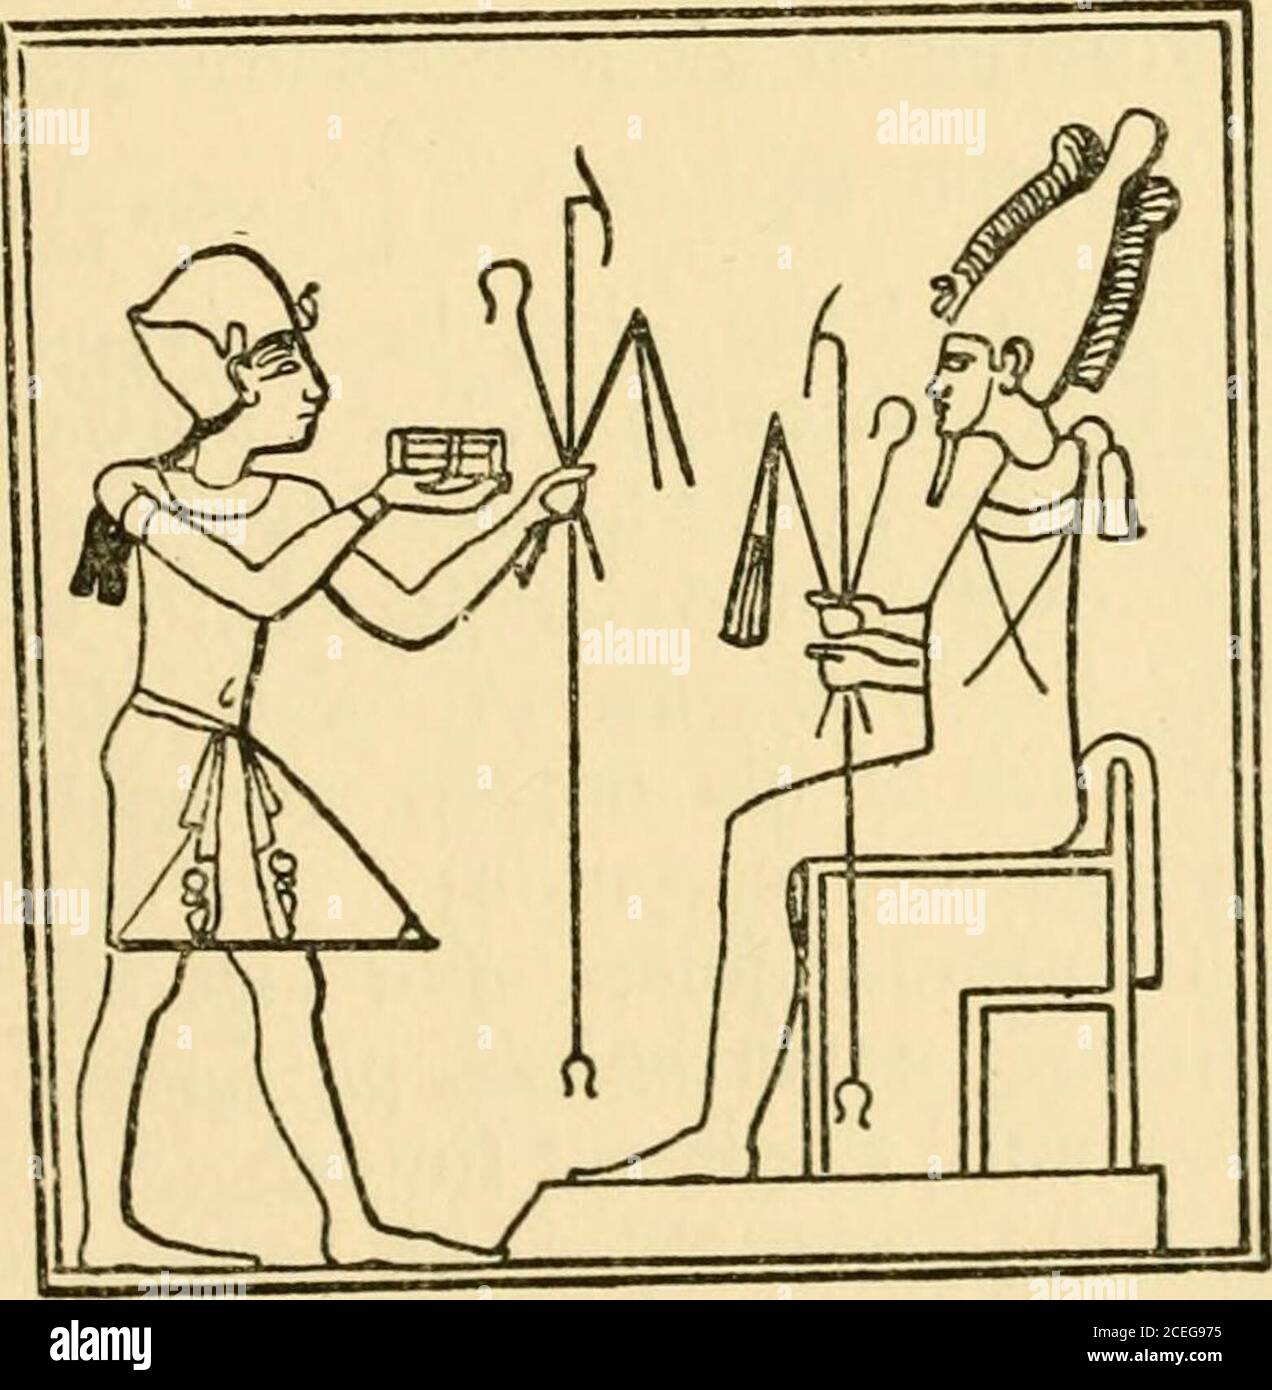 . Osiris and the Egyptian resurrection;. Seti I offering raiment to Osiris.Mariette, Abydos, Vol. I, p. 5°-. Seti I offering sceptres, etc., to Osiris.Mariette, Abydos, Vol. I, p. 48. Other words, his offerings went before him to the OtherWorld and awaited him there ;^ the offerings which hemade to the gods also were as treasure laid up inheaven, and there became his own again, according to1 See the Book Am-Tuat, Second Division. 264 Osiris and the Egyptian Resurrection some texts. As the offerings made to the gods broughtthe spirits of the gods to their statues to hold conversewith the king a Stock Photo